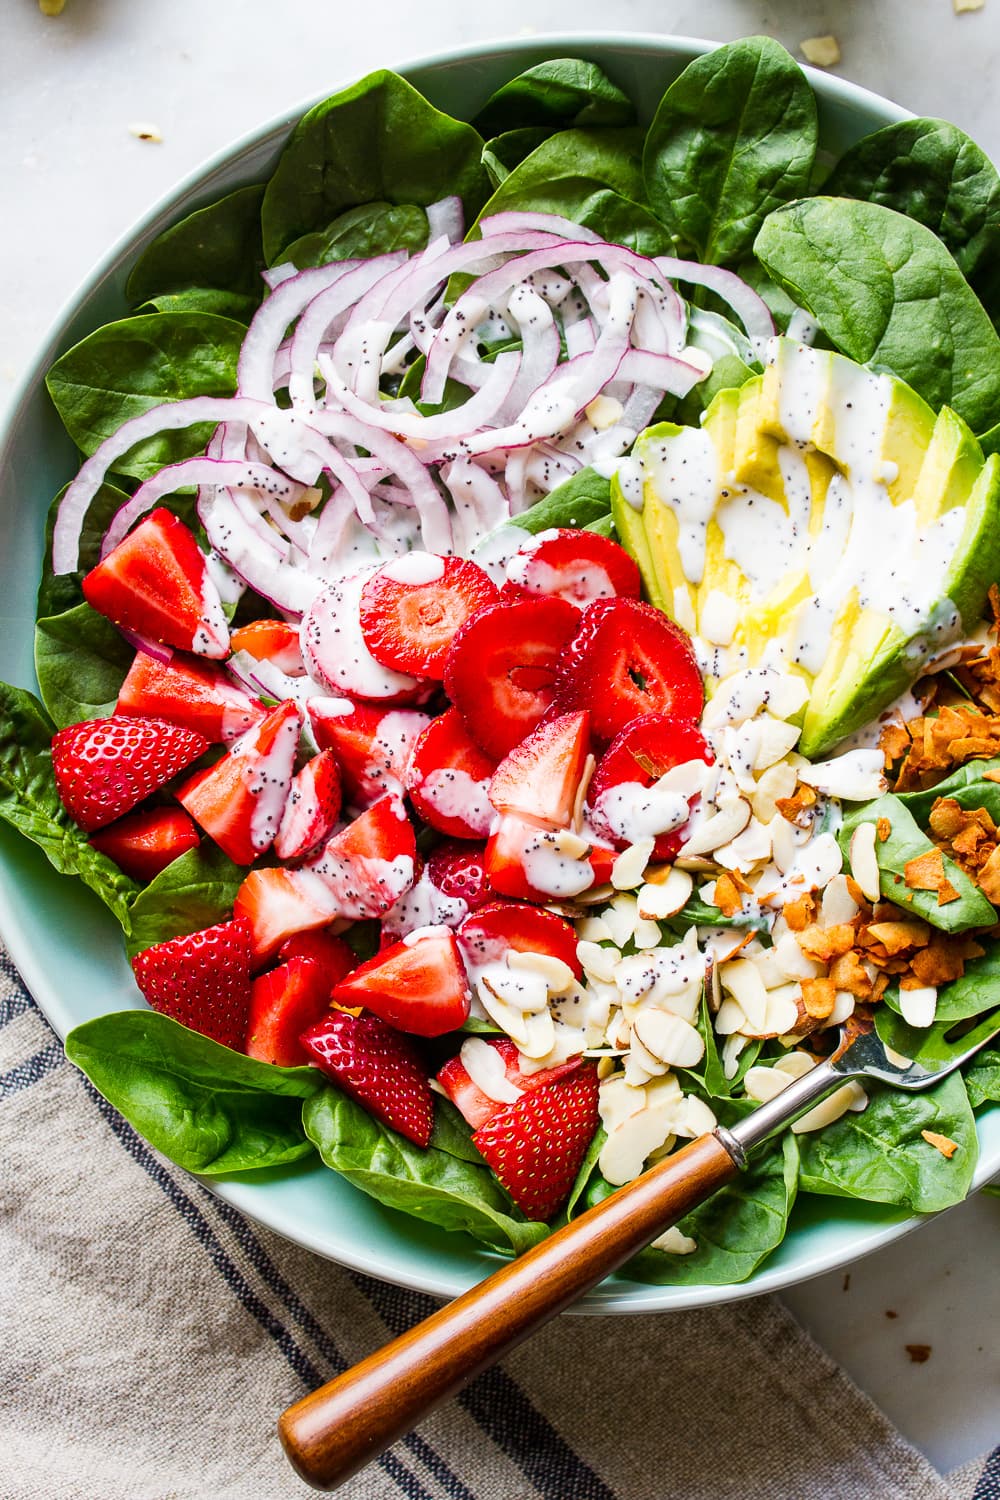 data-pin-description="Strawberry Spinach Salad with poppy seed dressing and avocado is nutritious, delicious and easy to make. Oil free, vegan and ready in 5 minutes! Easy, healthy vegan recipe perfect for lunch, dinner or entertaining!"